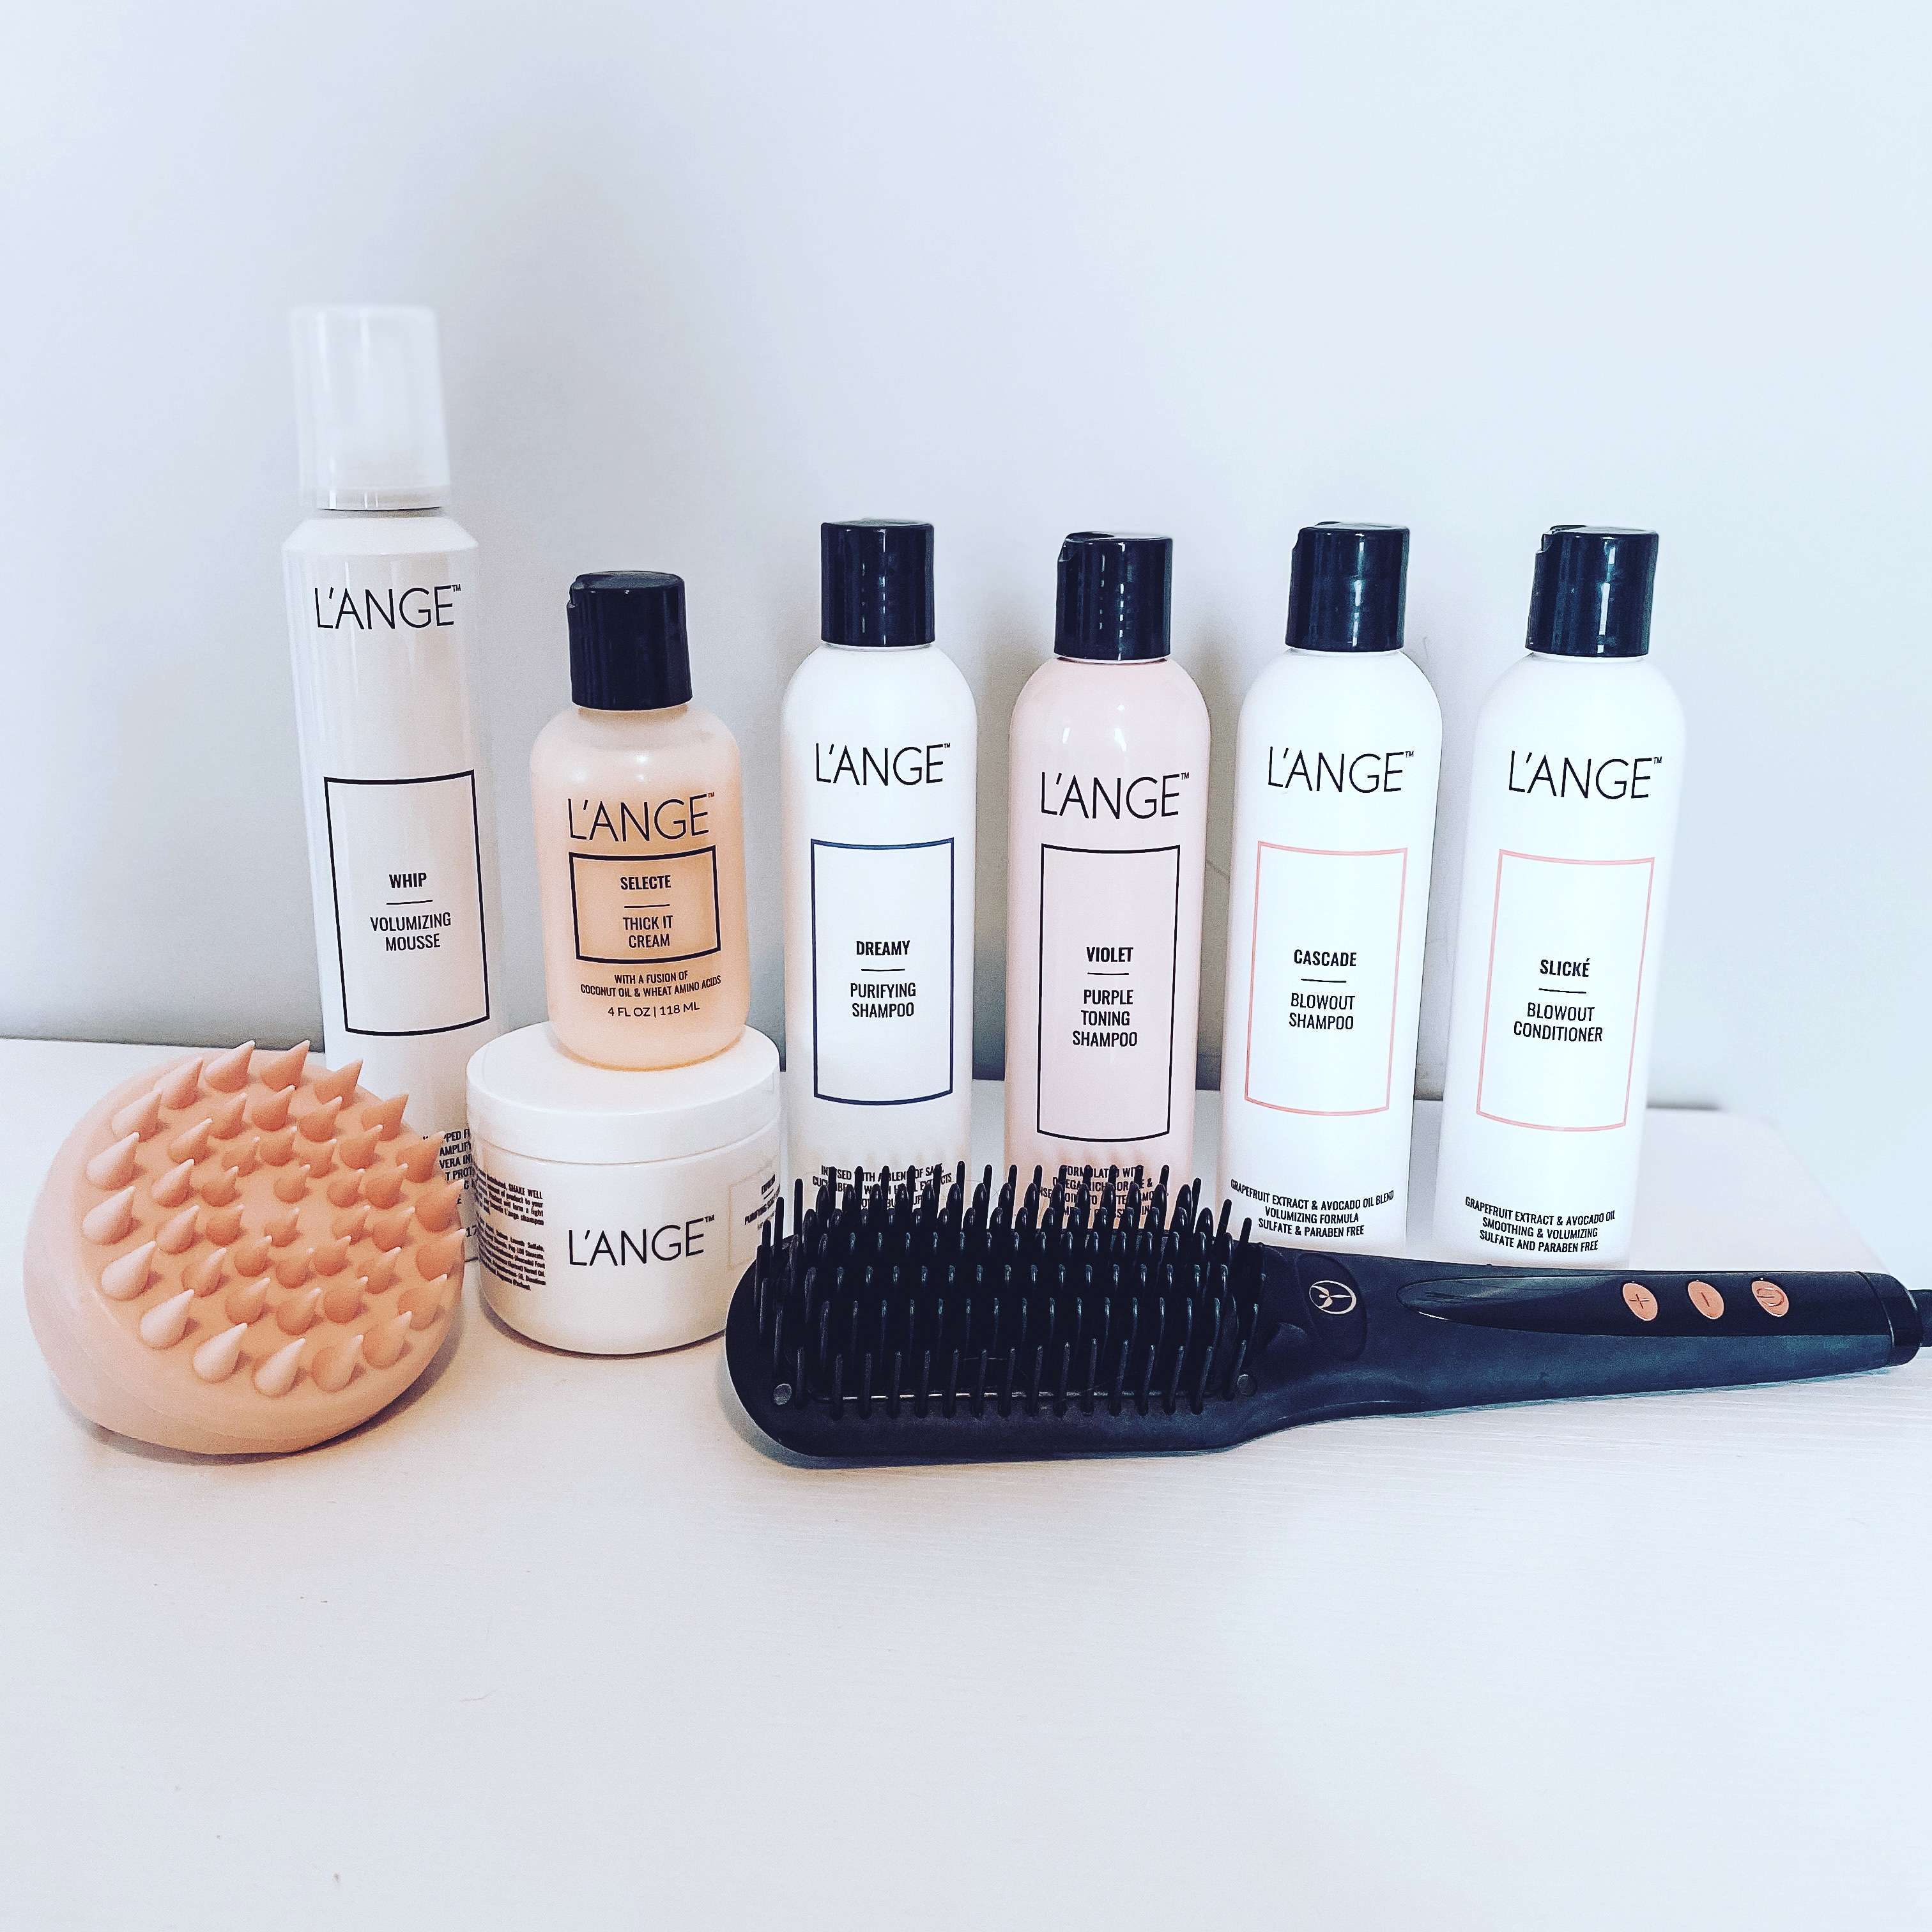 L'ANGE Hair products feature image